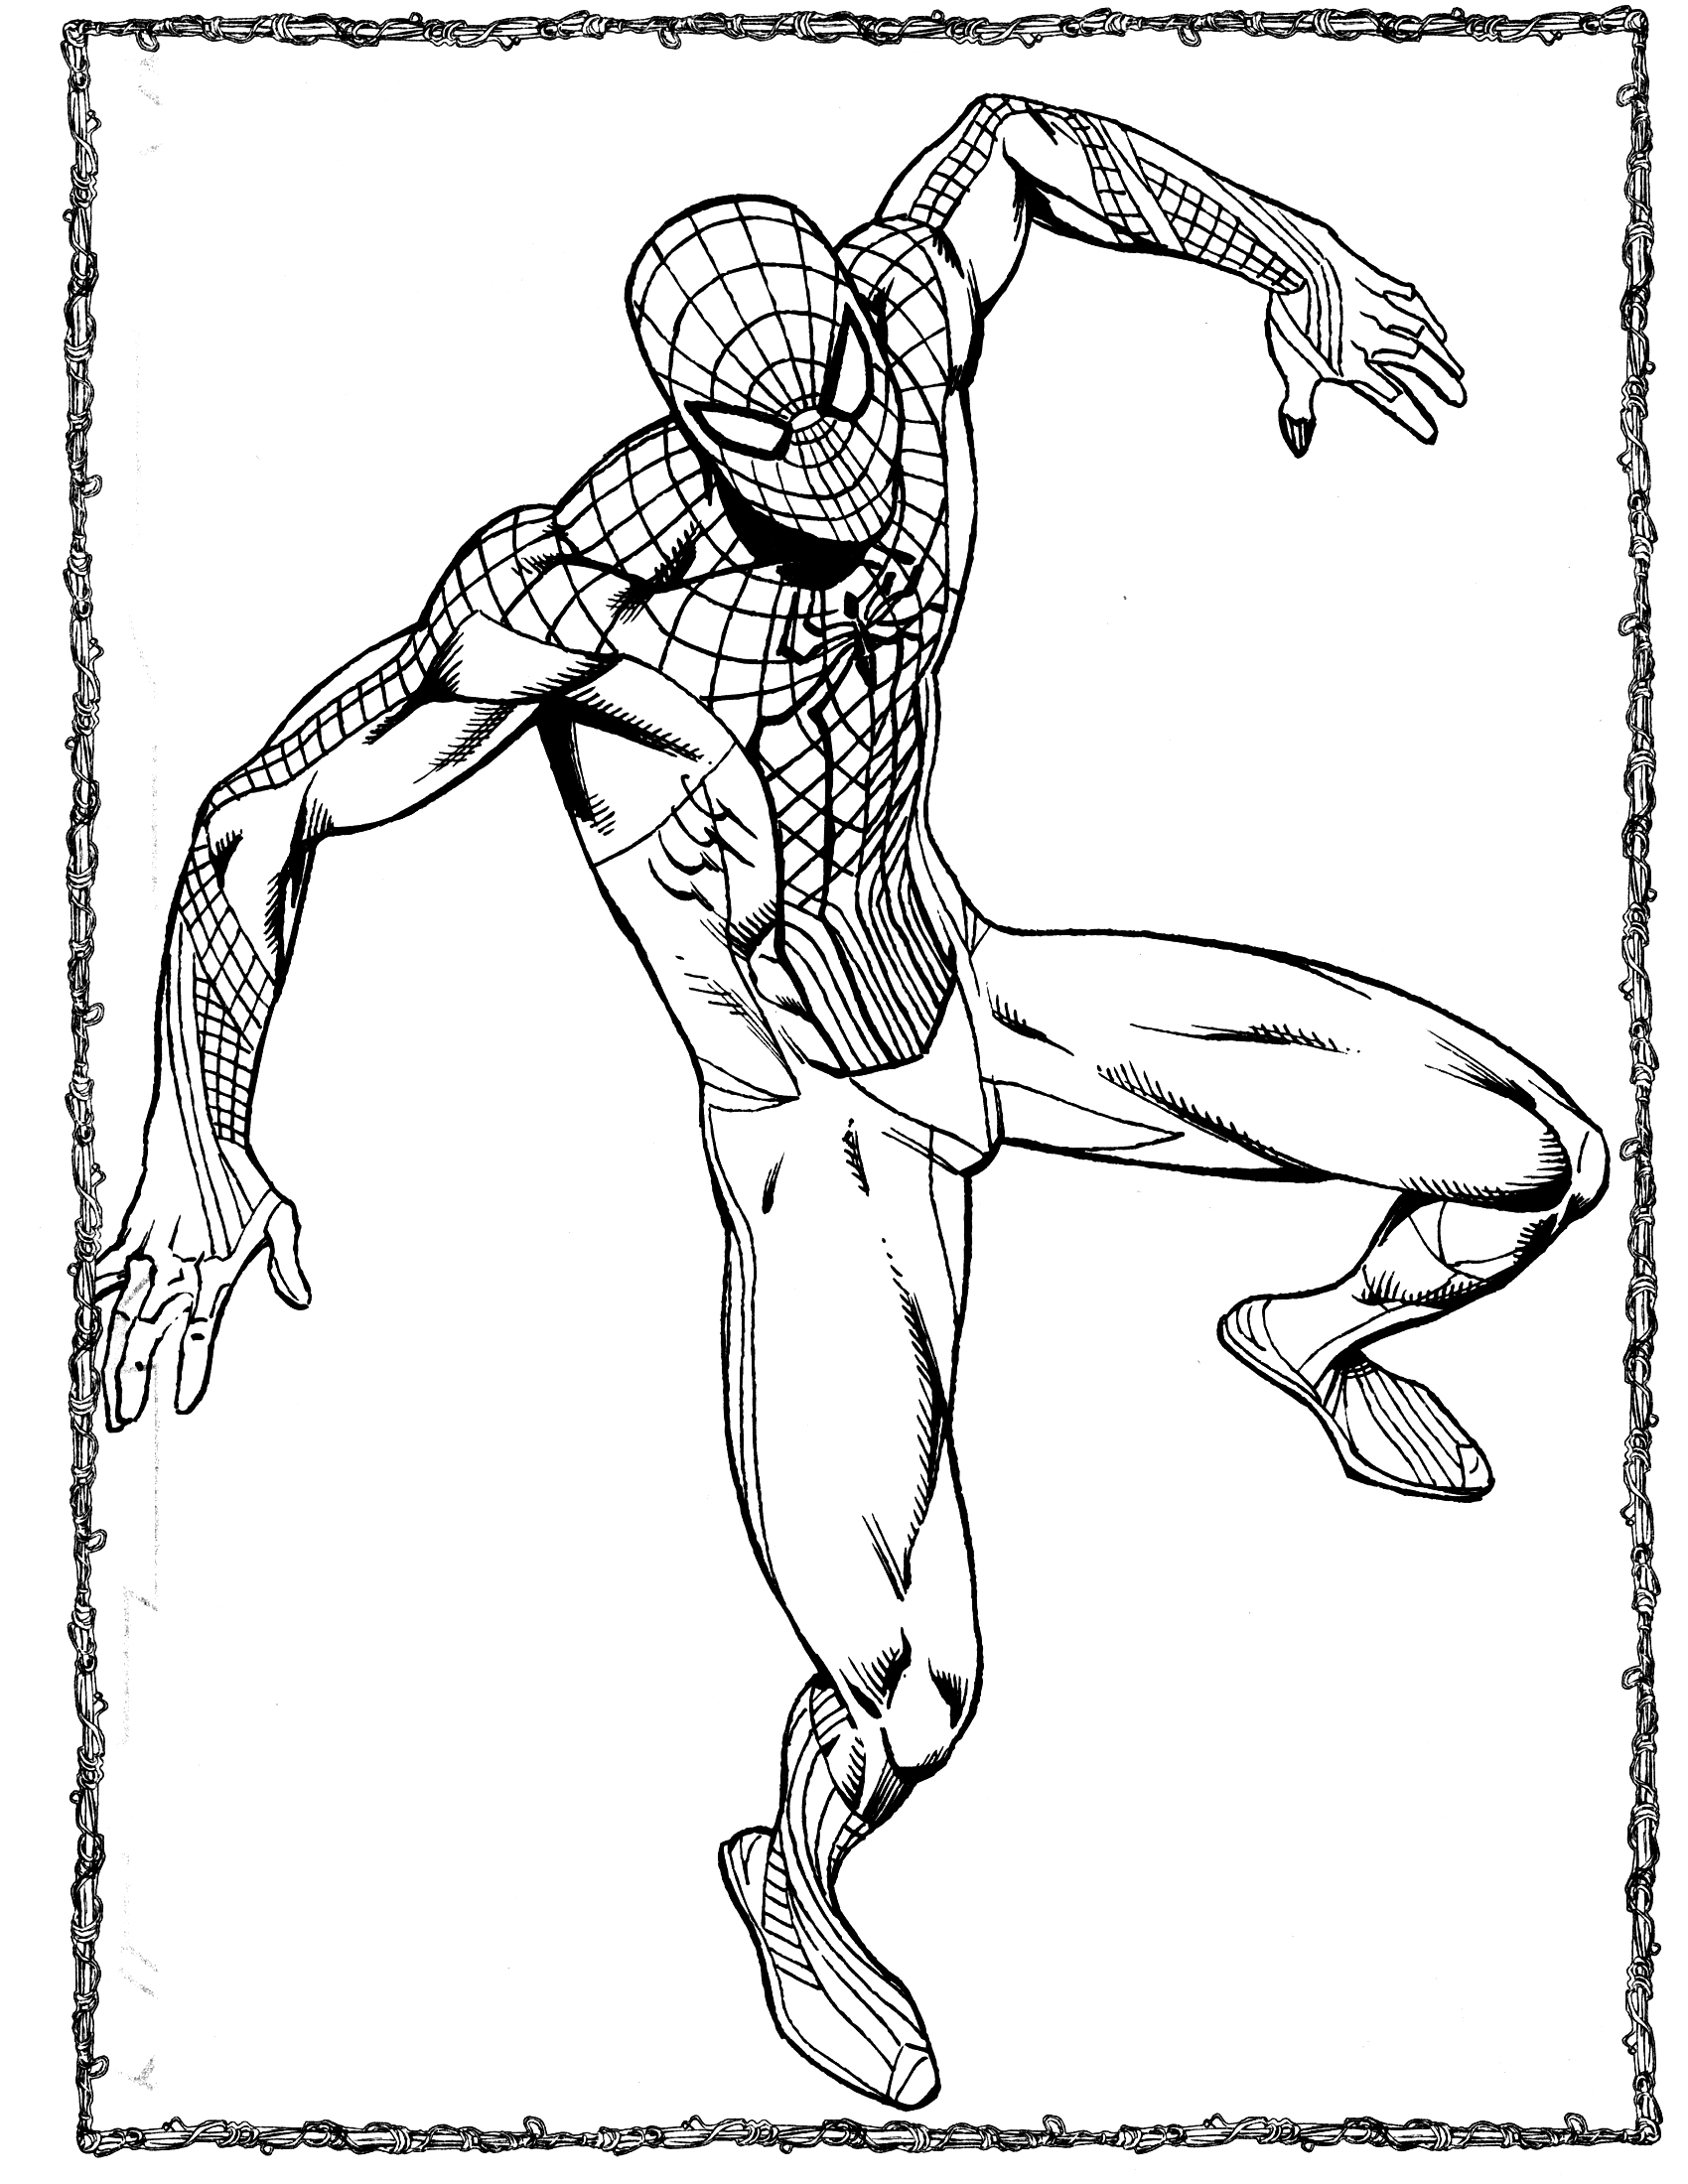 The Amazing Spider Man 2 Coloring Pages at GetColorings